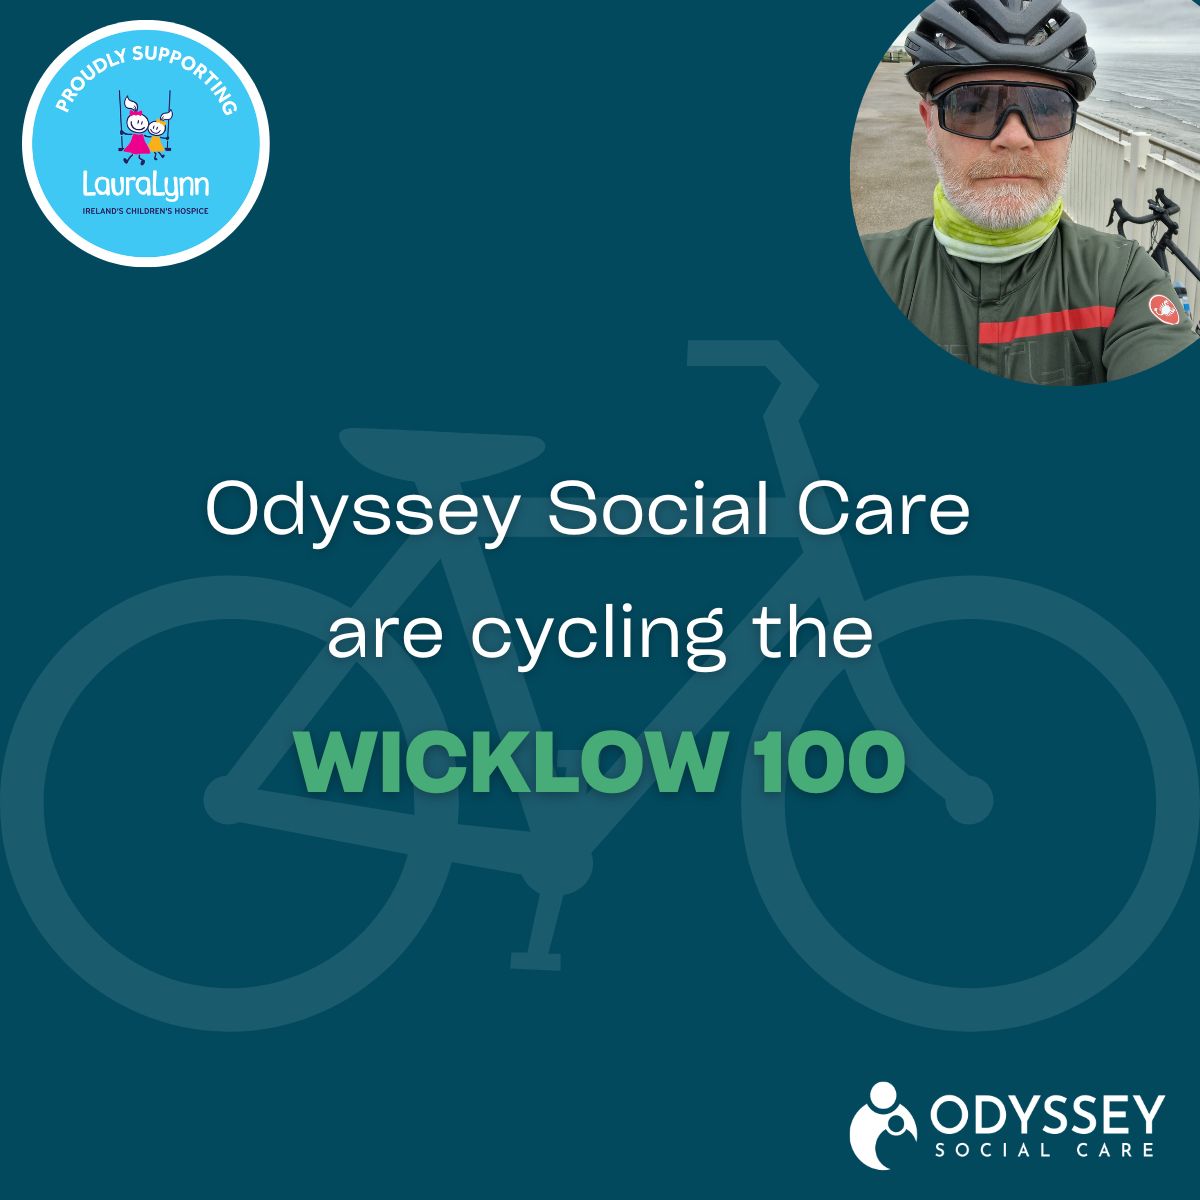 Odyssey Social Care are cycling the Wicklow 100 in aid of @LauraLynnHouse and we would love your support!
 
Click on the link below to donate, and thank you for your generosity.

idonate.ie/fundraiser/Ody…

#CharityFundraiser #ChildrensServices #Fundraising